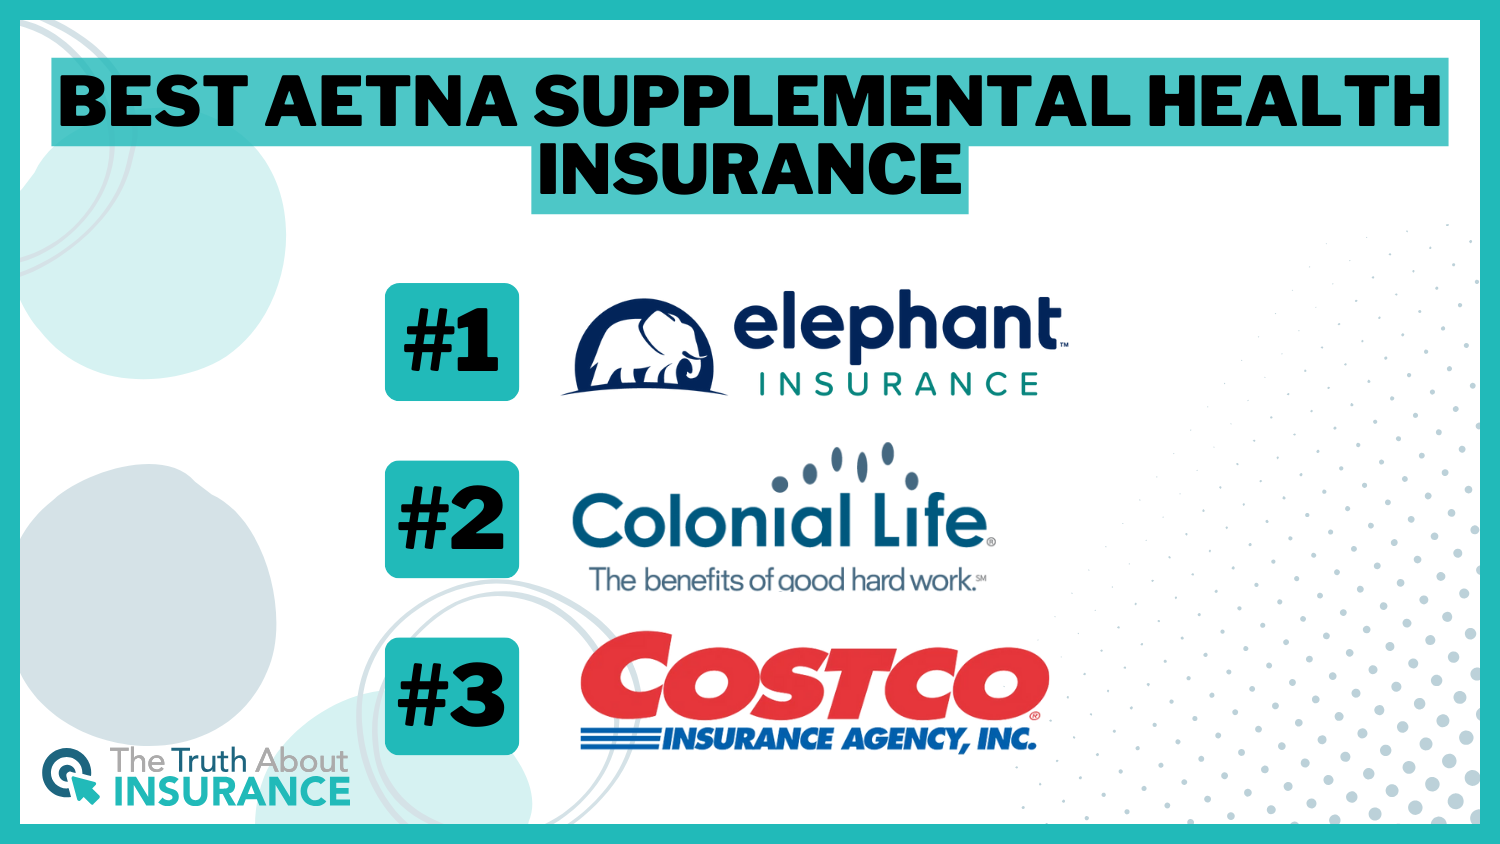 Best Aetna Supplemental Health Insurance: Elephant, Colonial Life, Costco